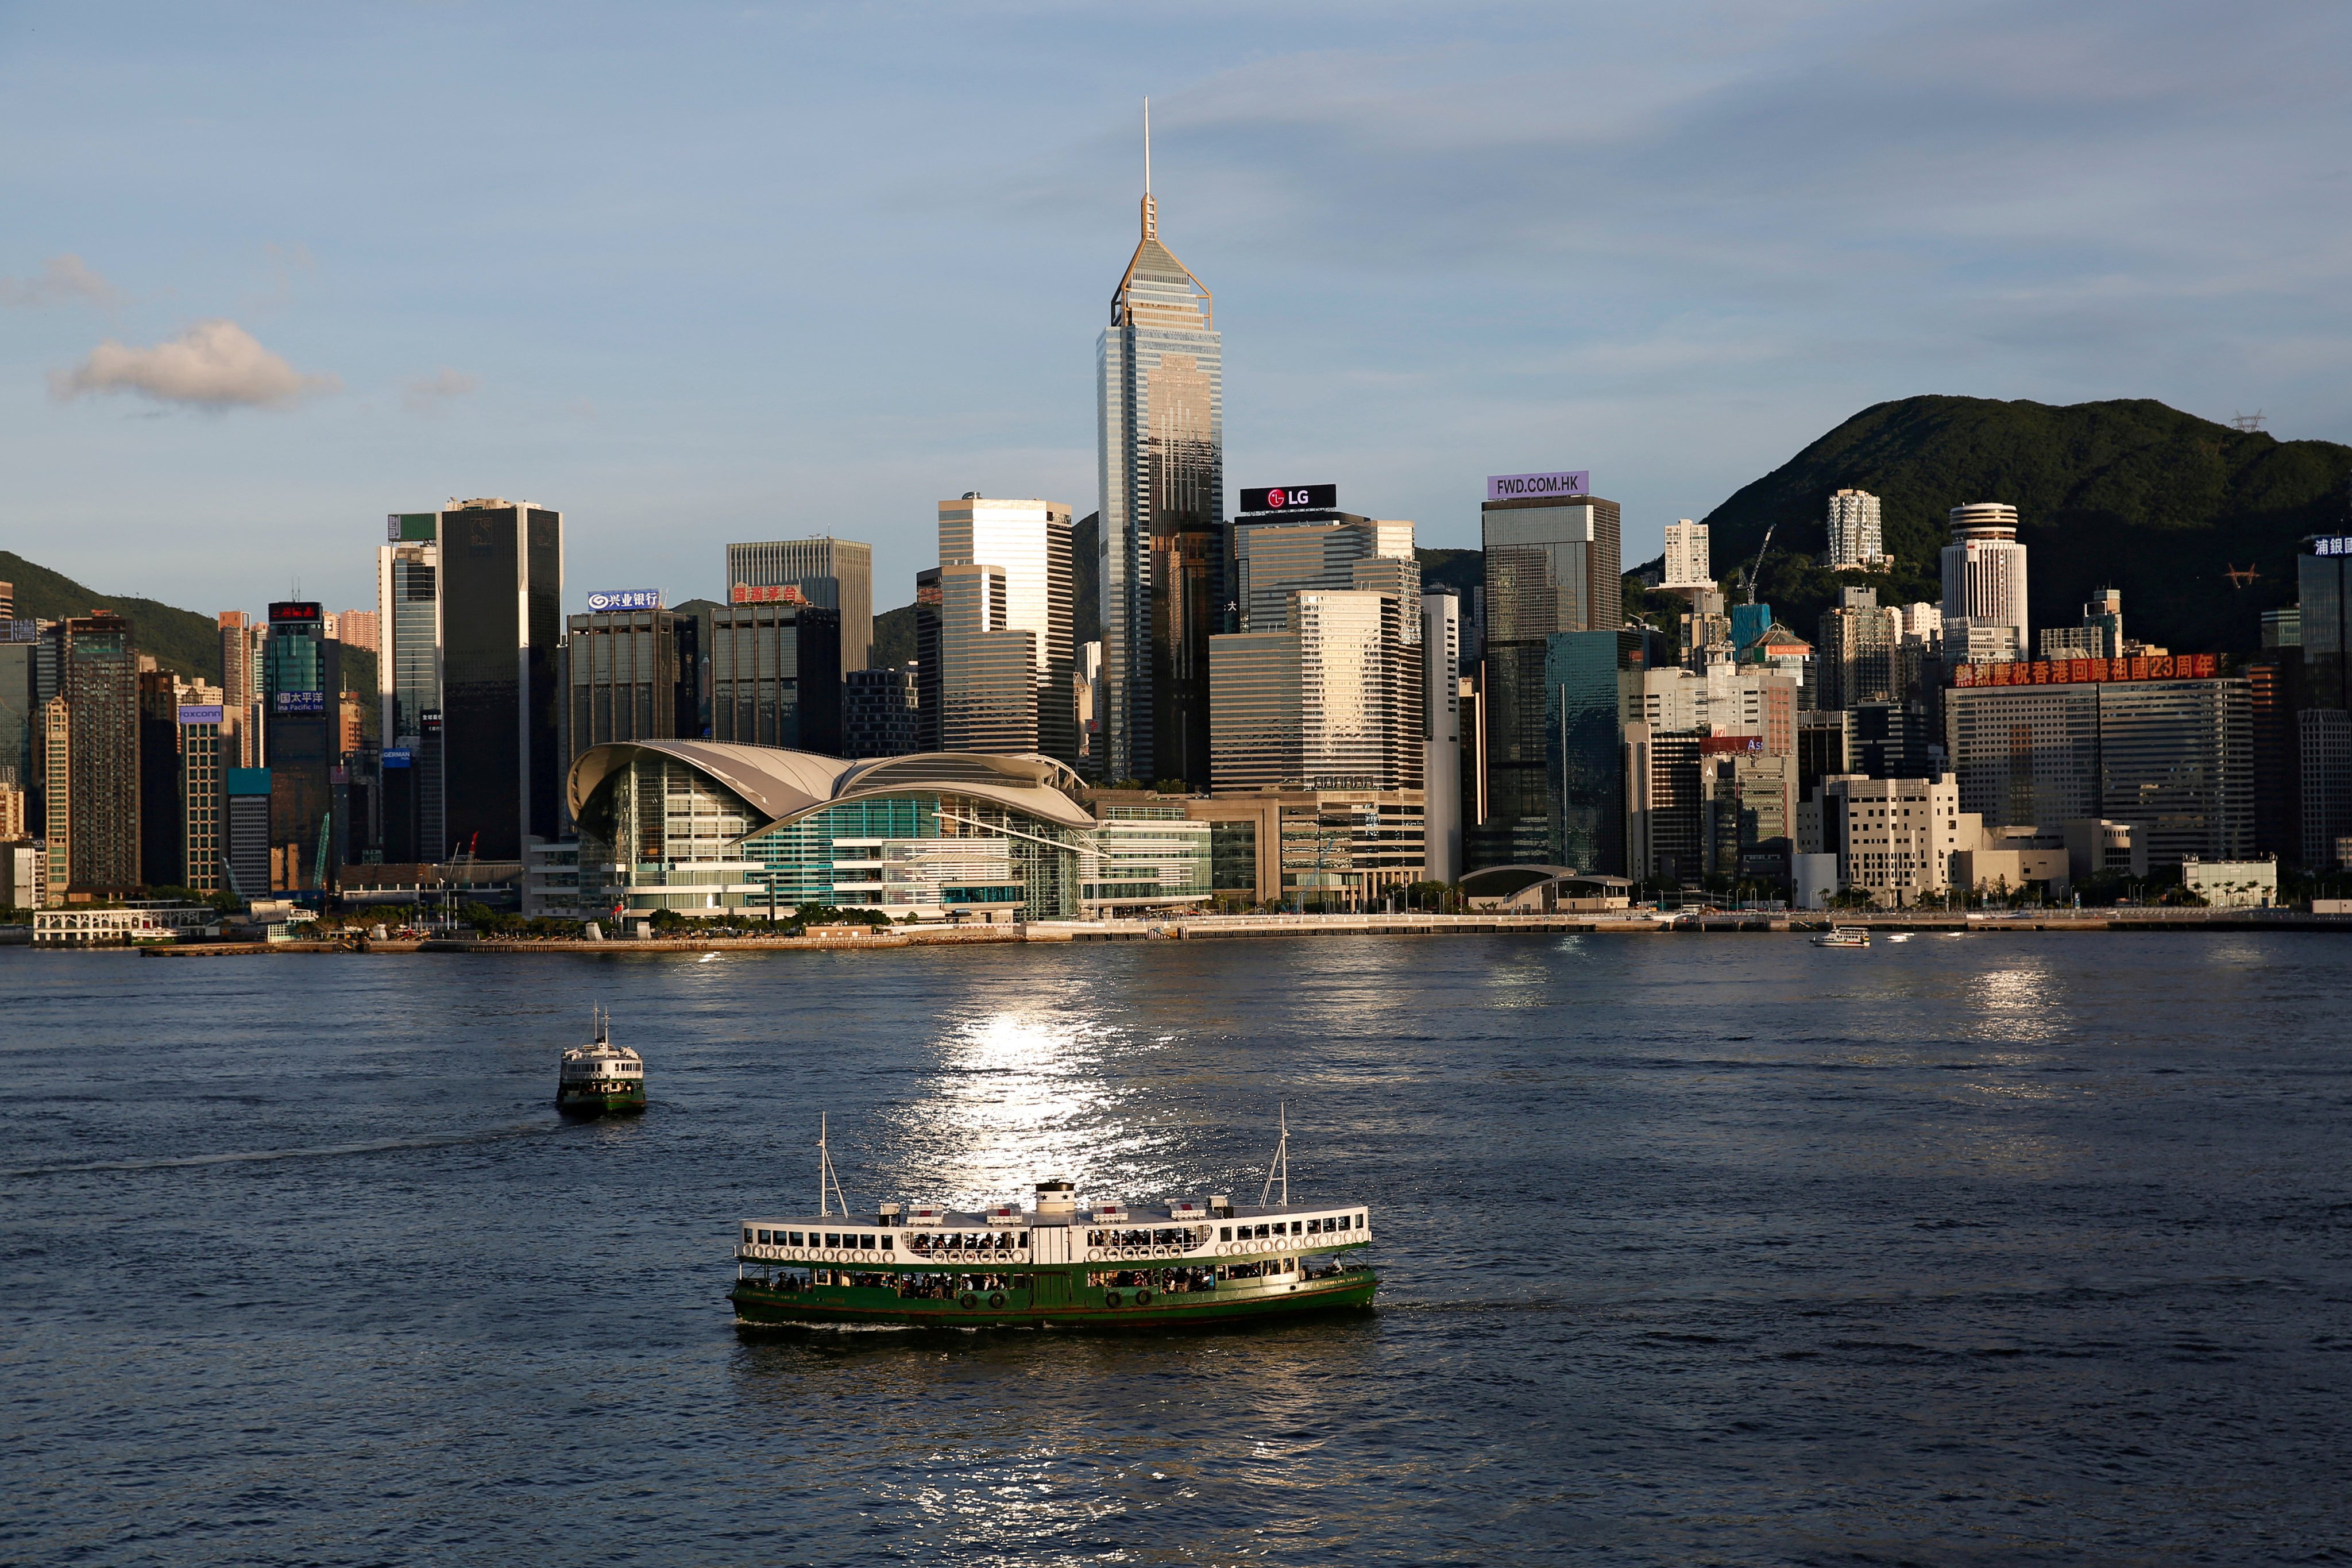 Hong Kong’s small accounting firms are cutting corners and failing to learn from past mistakes, potentially eroding public trust in the city as an international financial centre, according to a senior regulator. Photo: Reuters